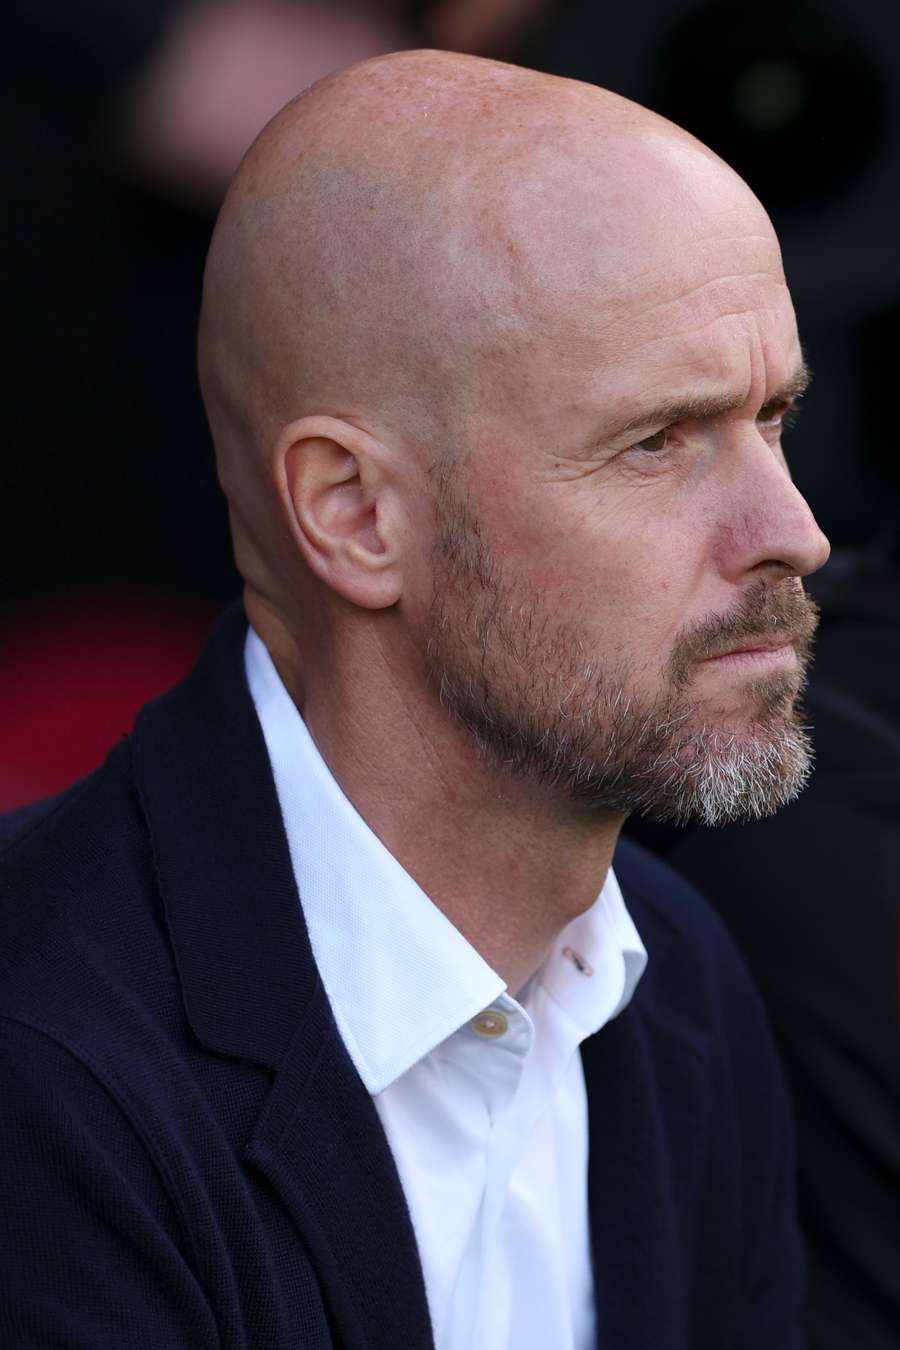 Manchester United's Dutch manager Erik ten Hag waits for the start of the English Premier League football match between Bournemouth and Manchester United